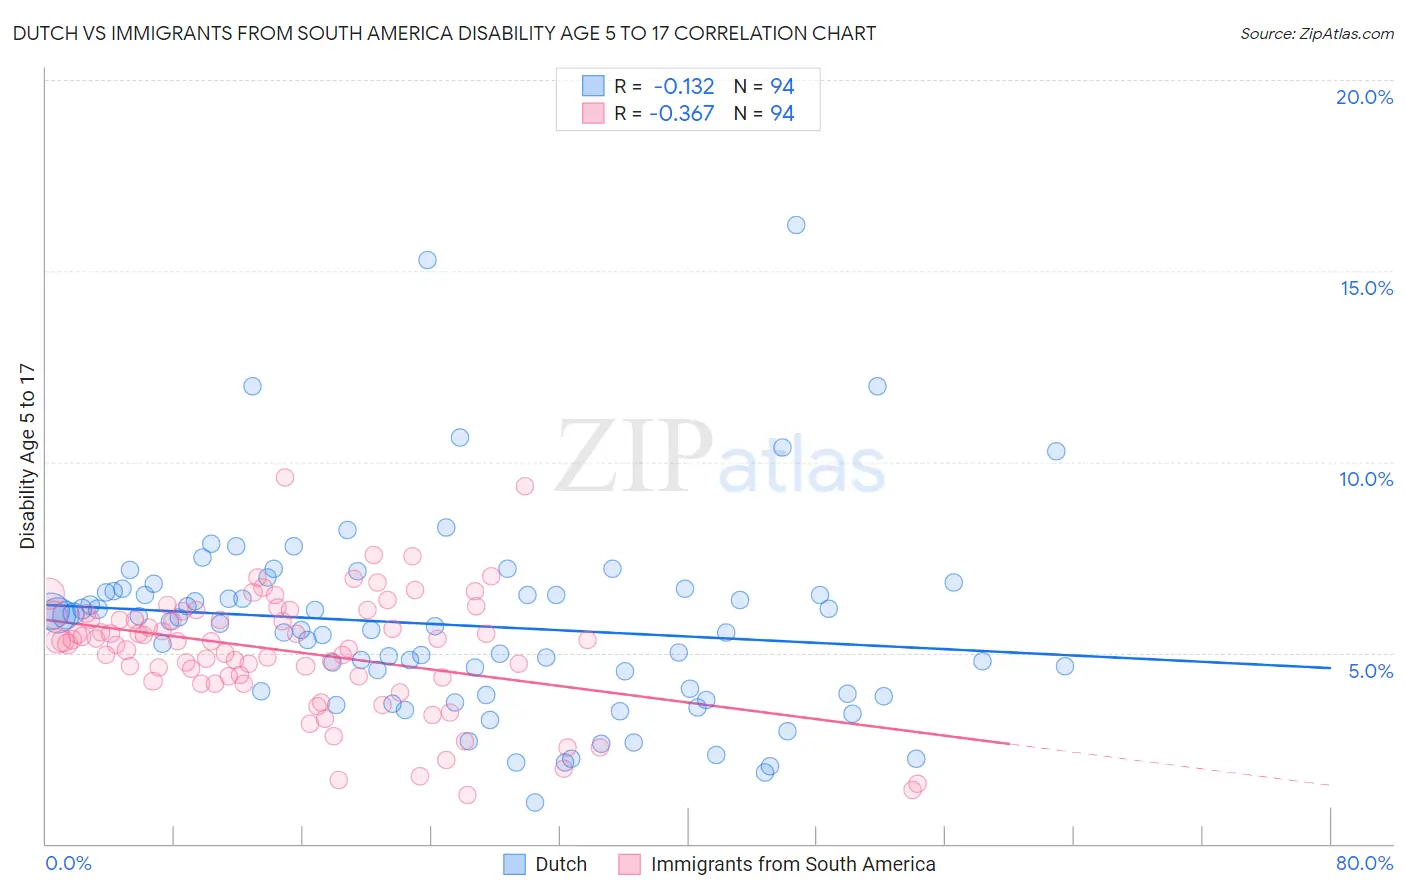 Dutch vs Immigrants from South America Disability Age 5 to 17